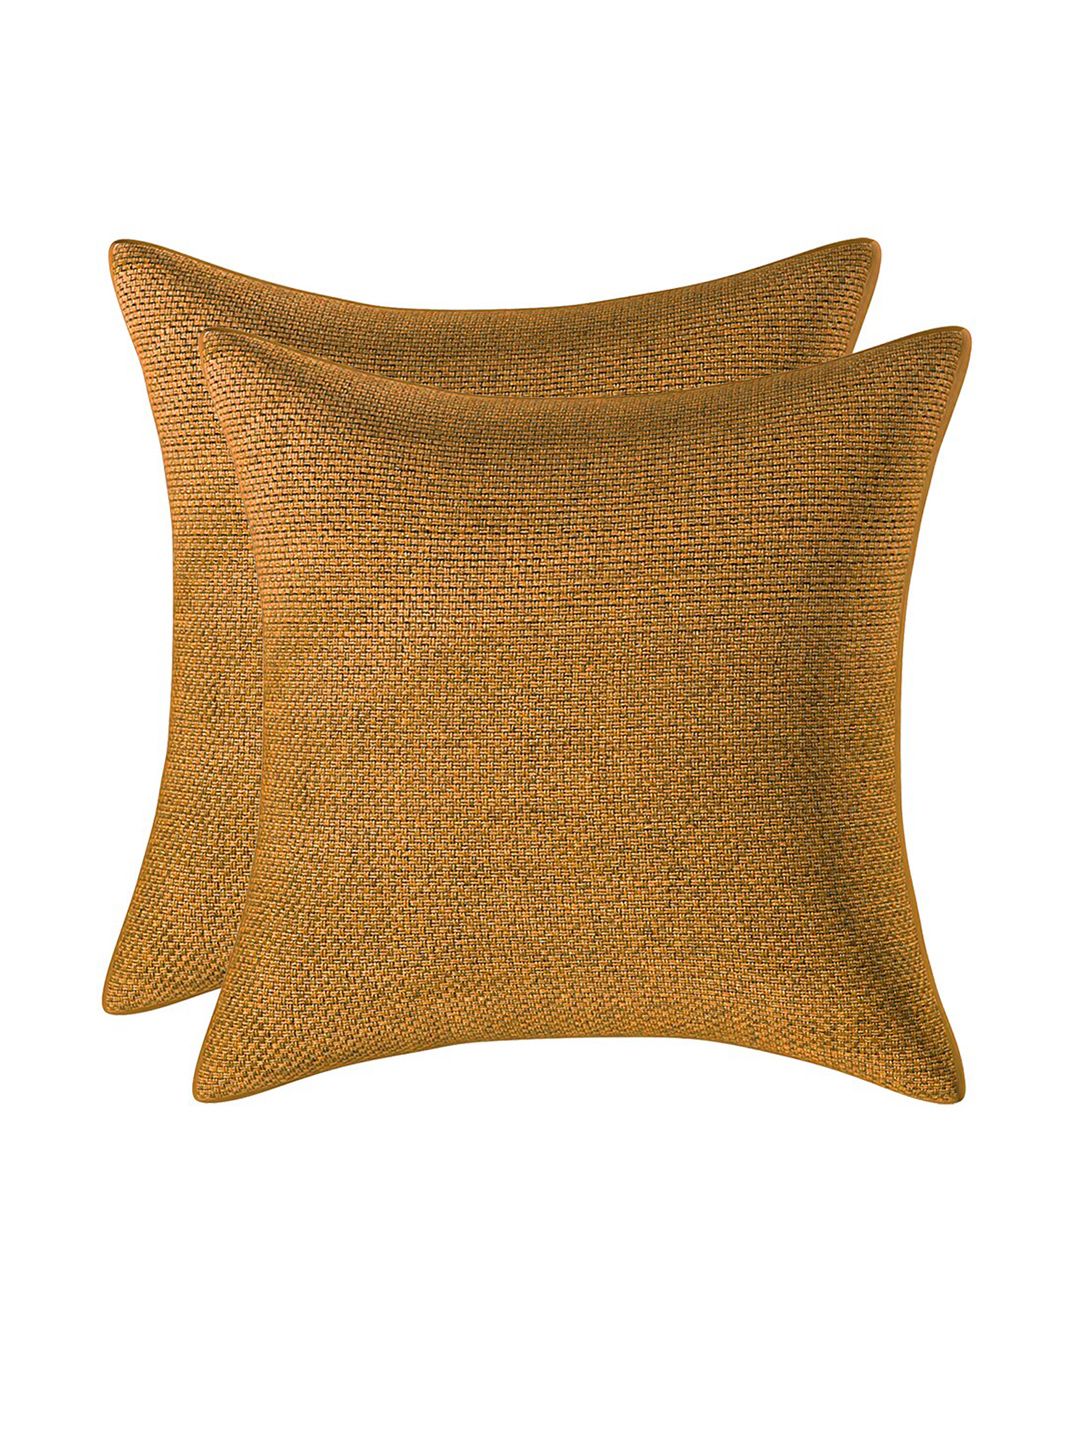 Kuber Industries Gold Set of 2 Square Cushion Covers Price in India